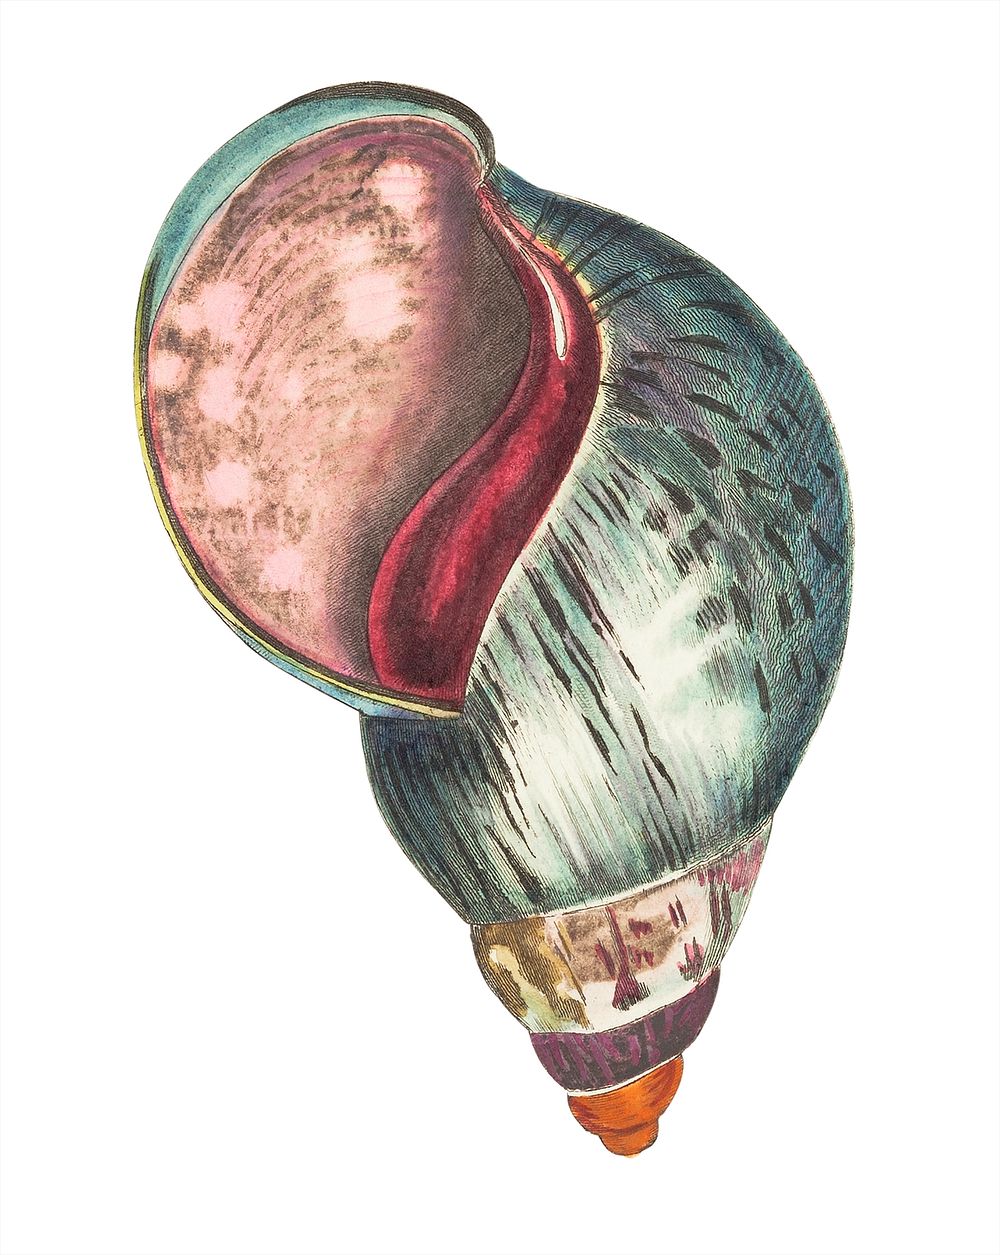 Agate bulla illustration from The Naturalist's Miscellany (1789-1813) by George Shaw (1751-1813)